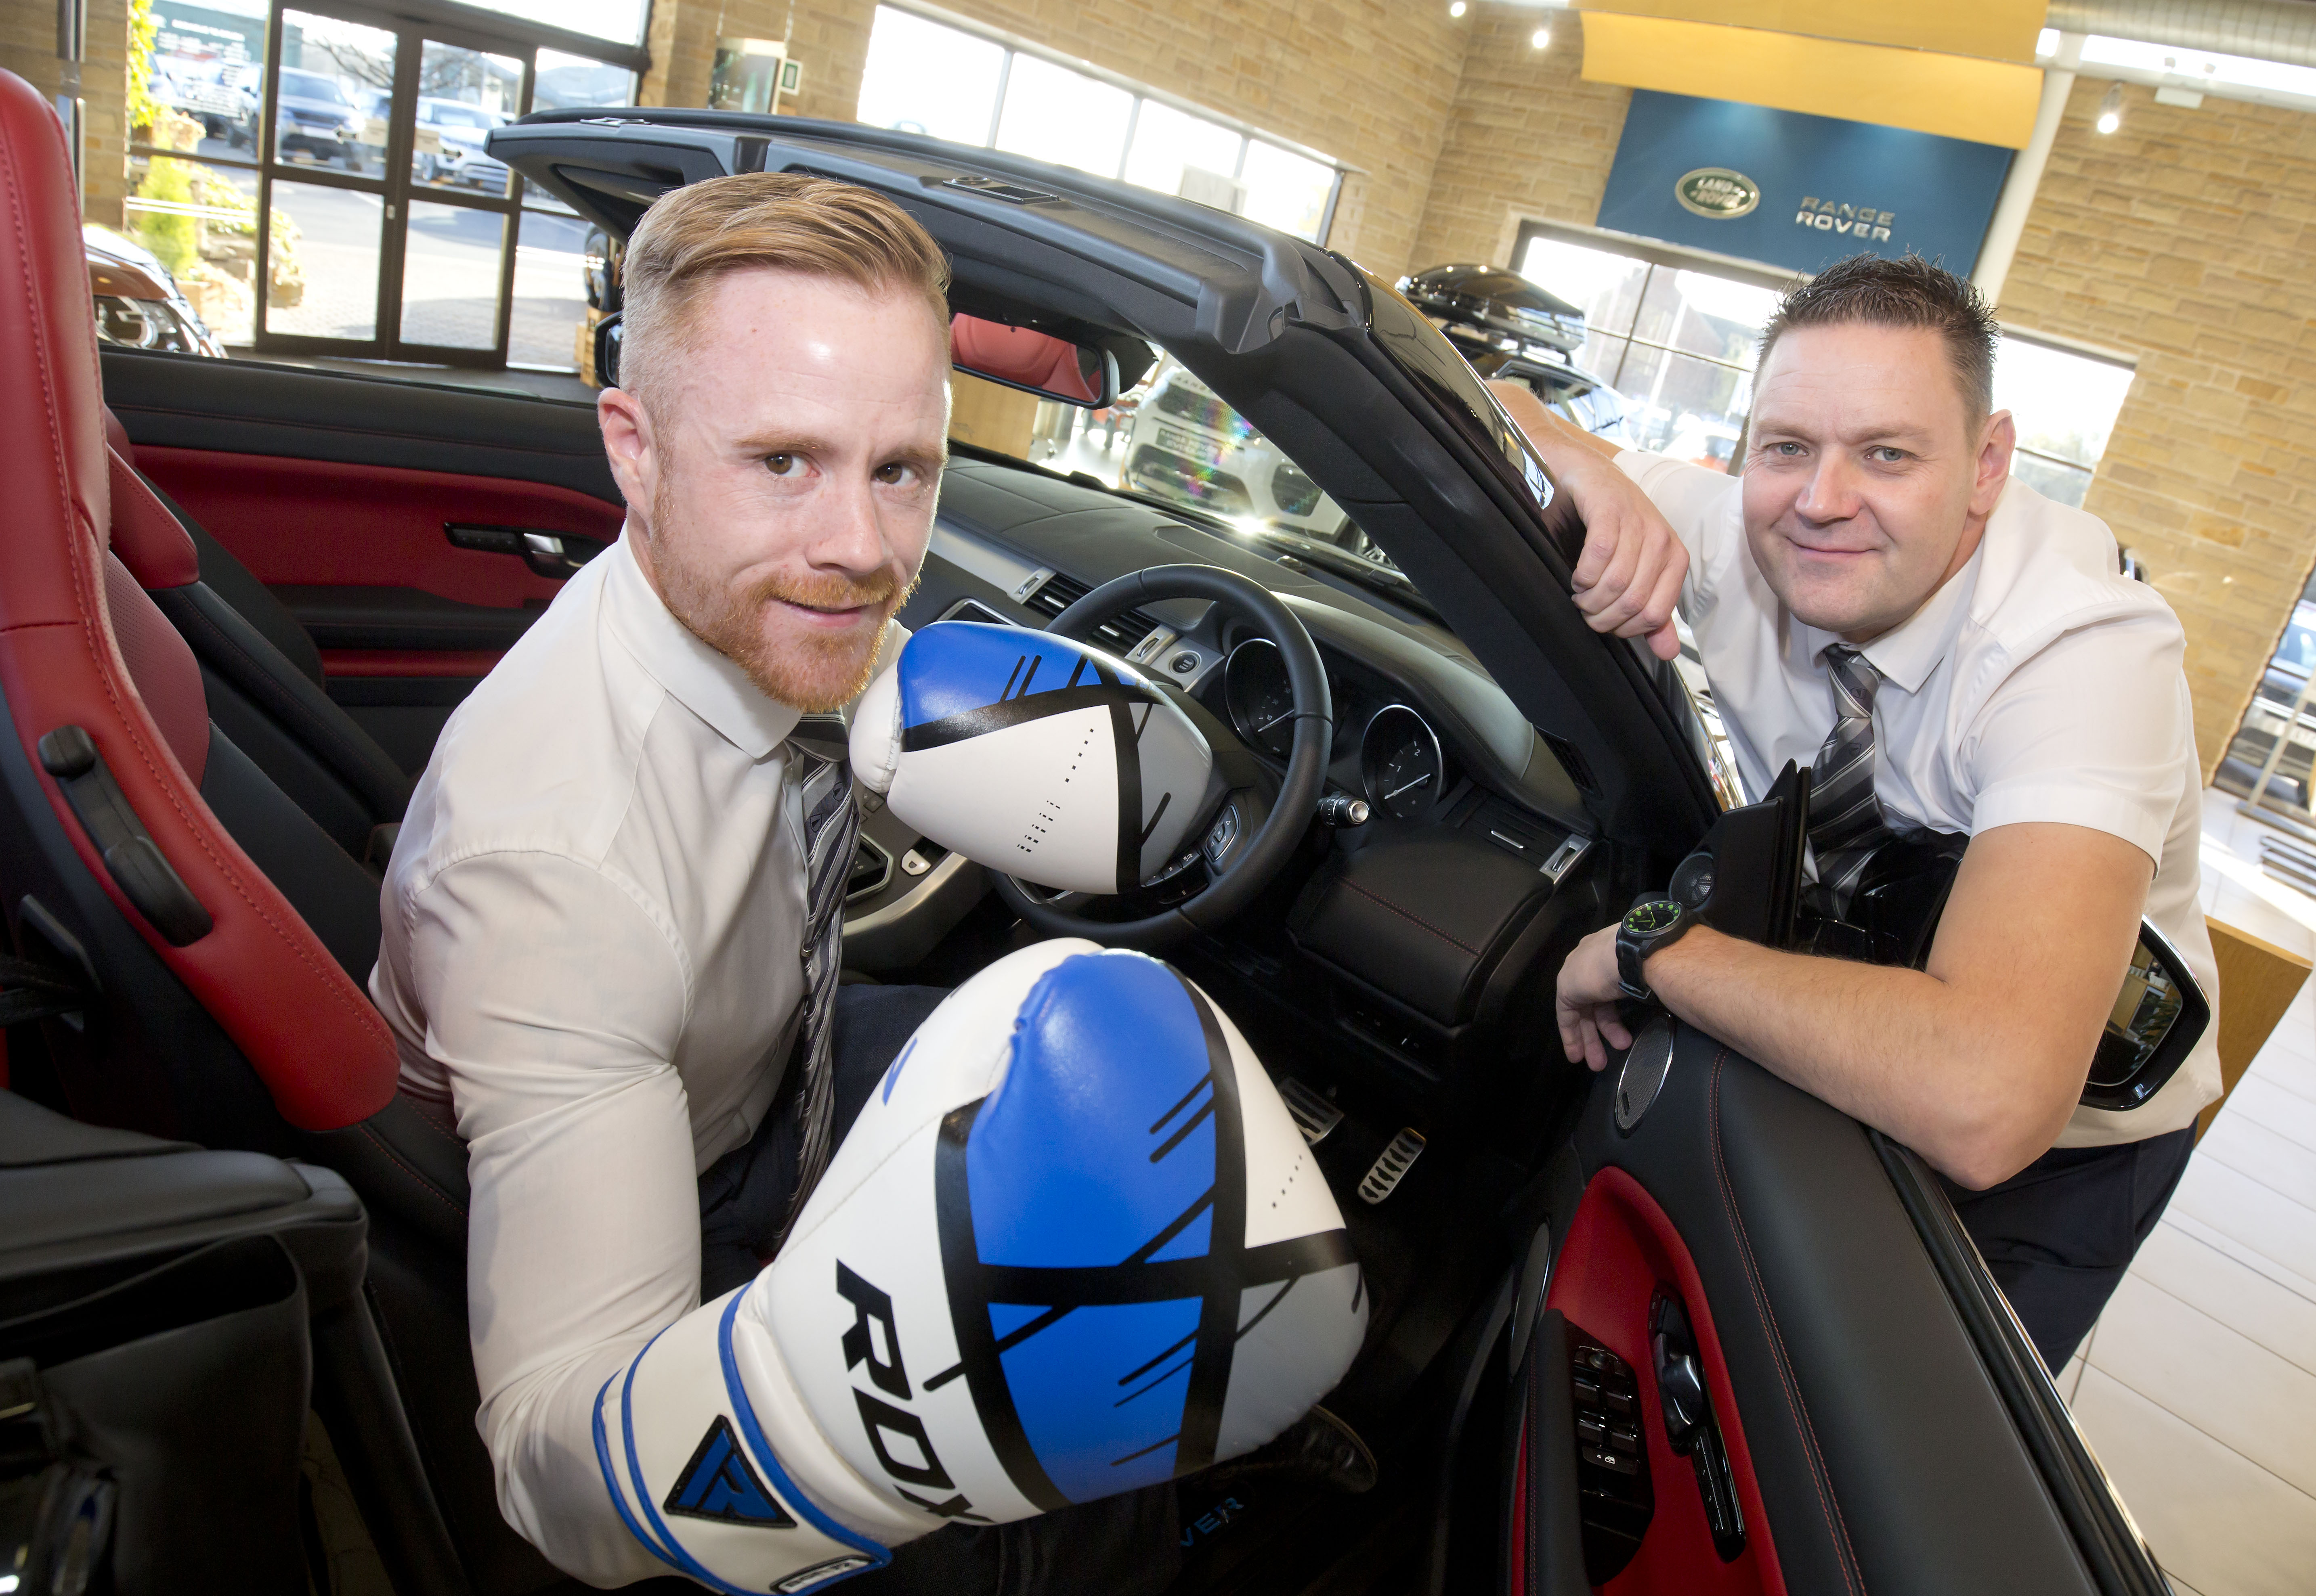 Business Manager gets in the ring for Cancer Research UK